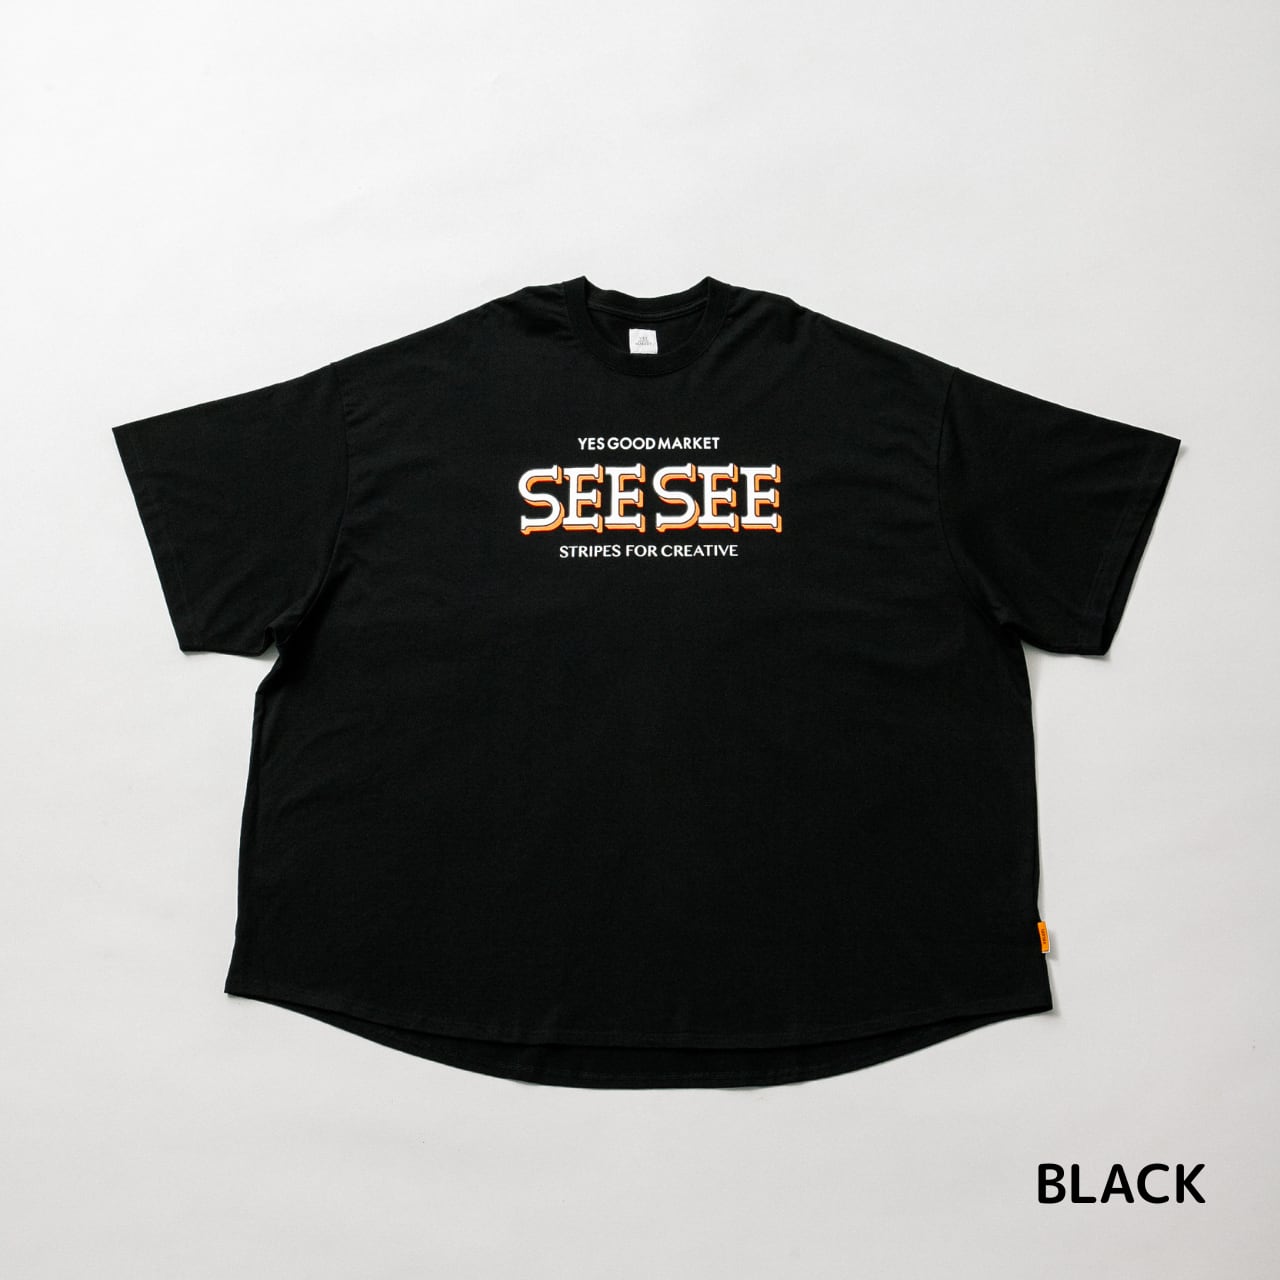 YGM×SEE SEE×S.F.C SUPER BIG ROUND TEE | Yes Good Market ...